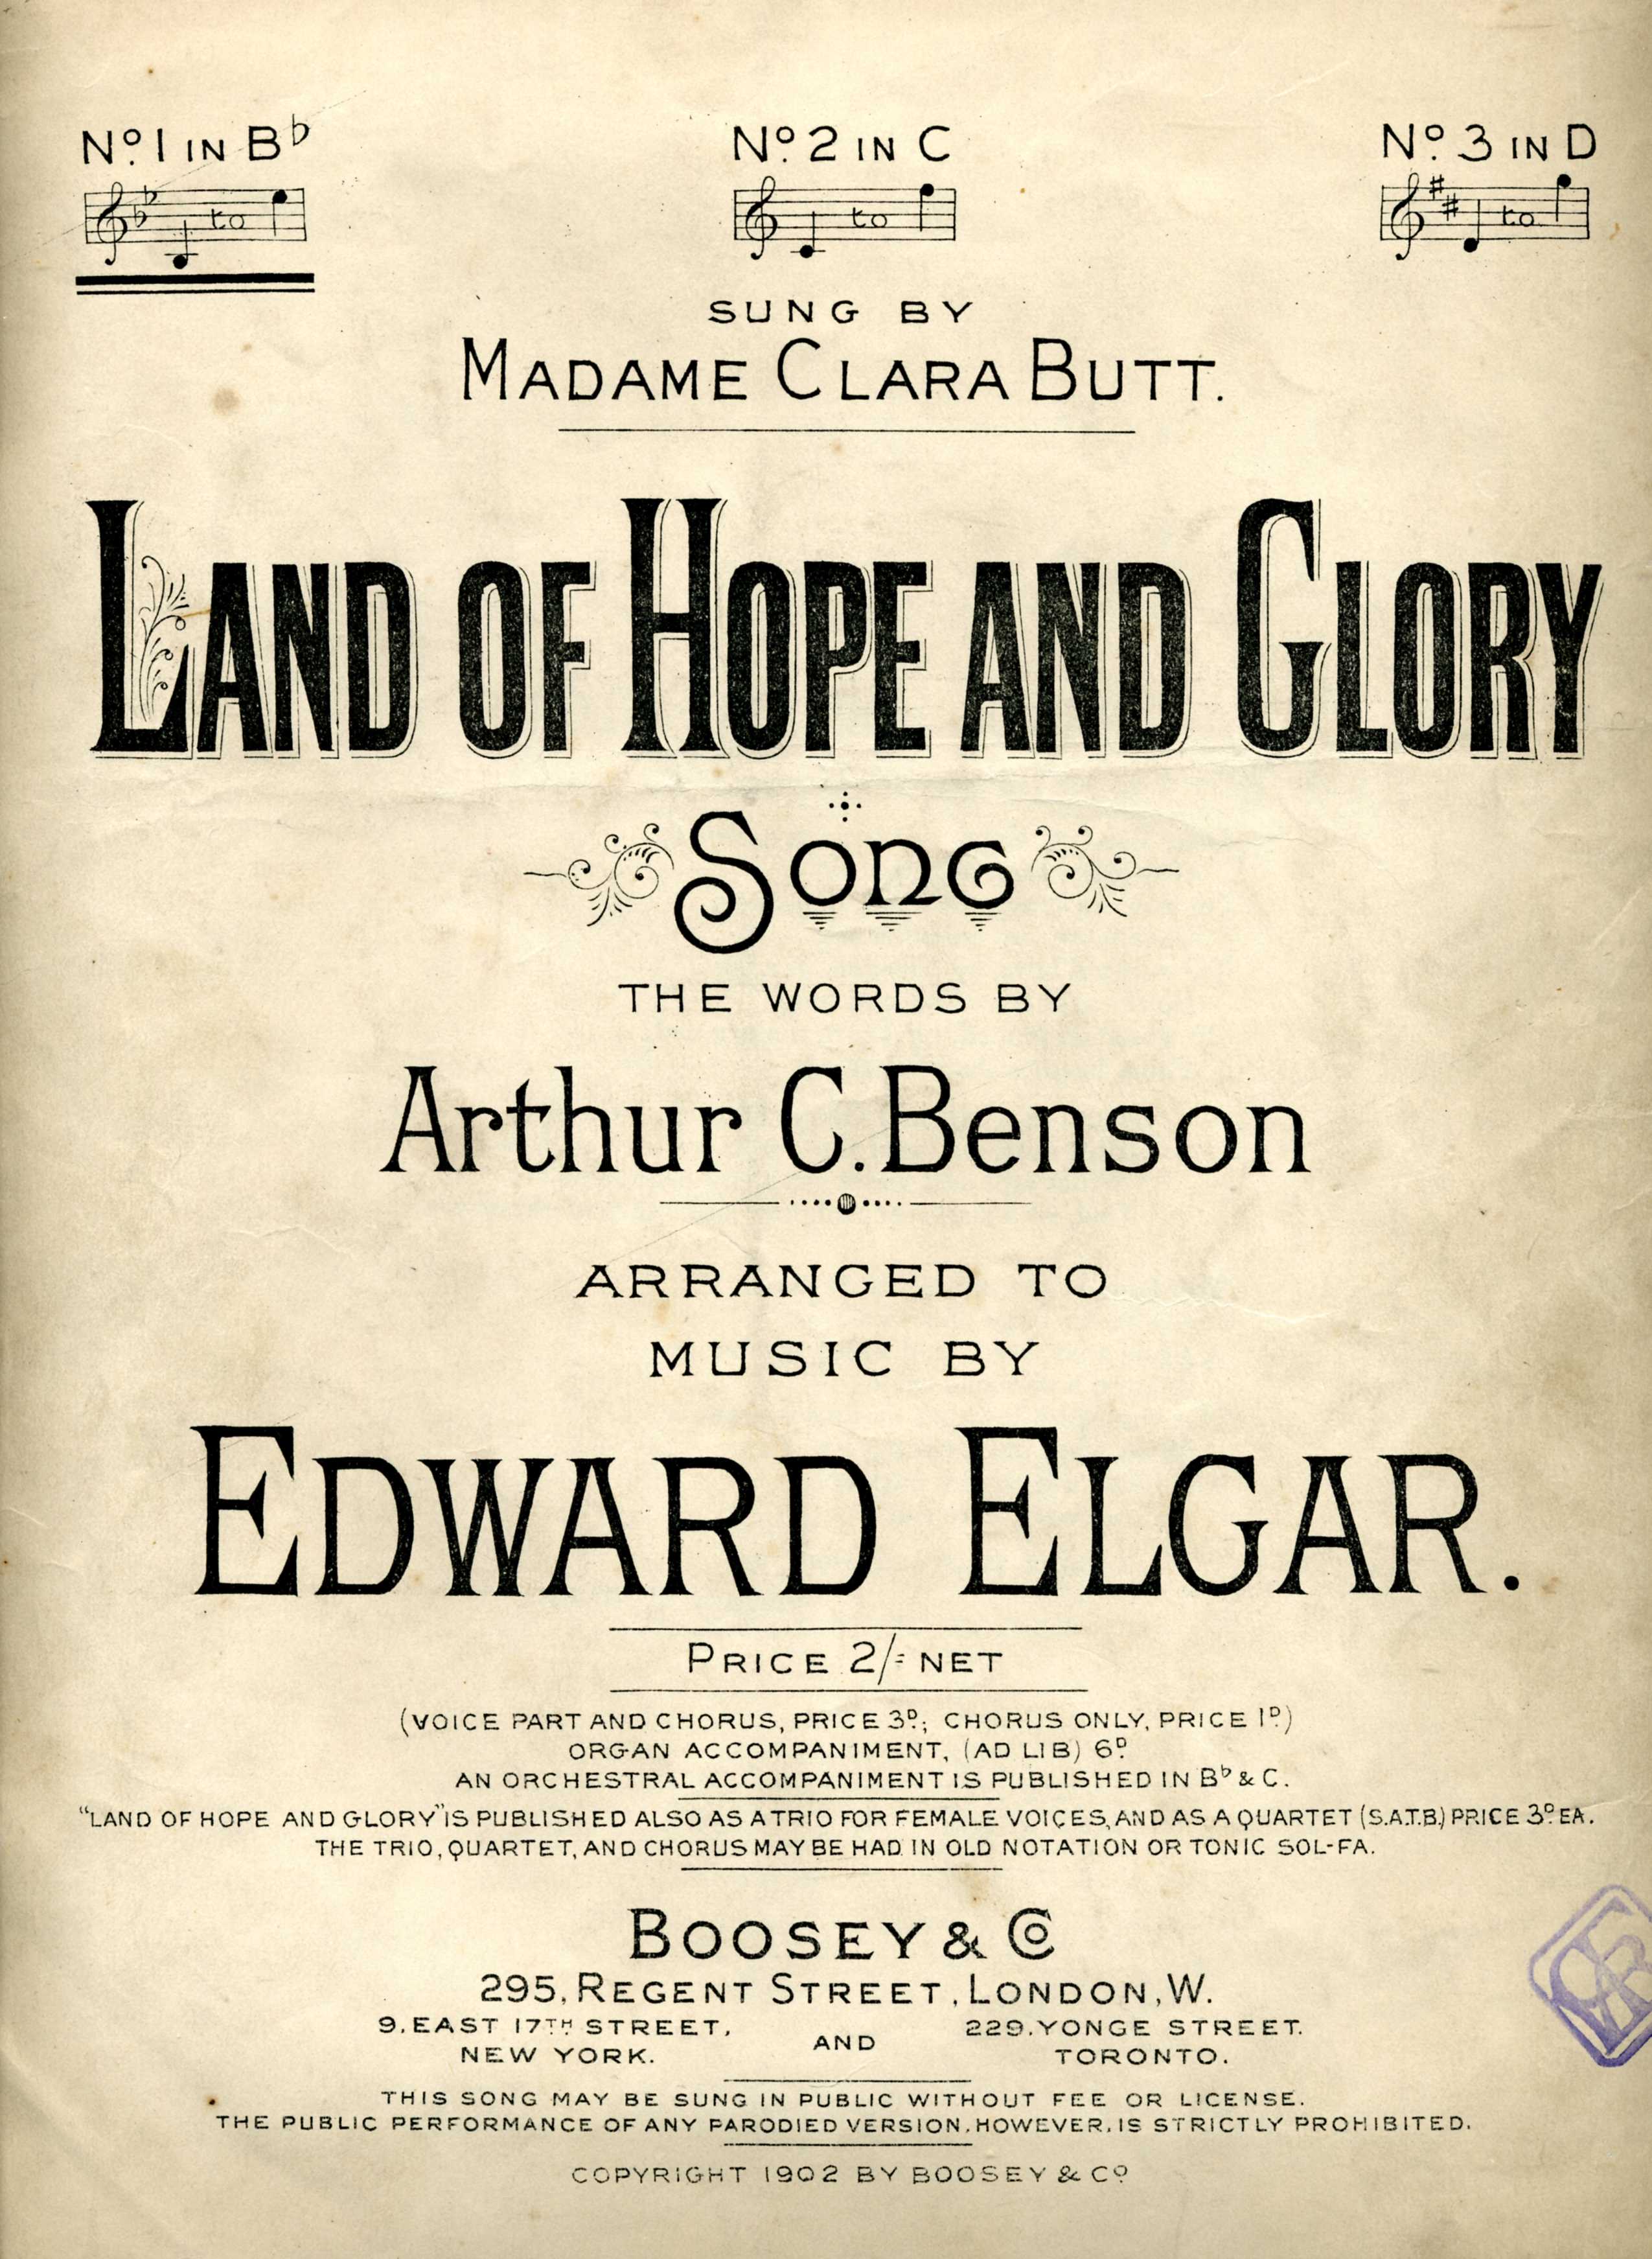 Land of Hope and Glory by Elgar song cover 1902